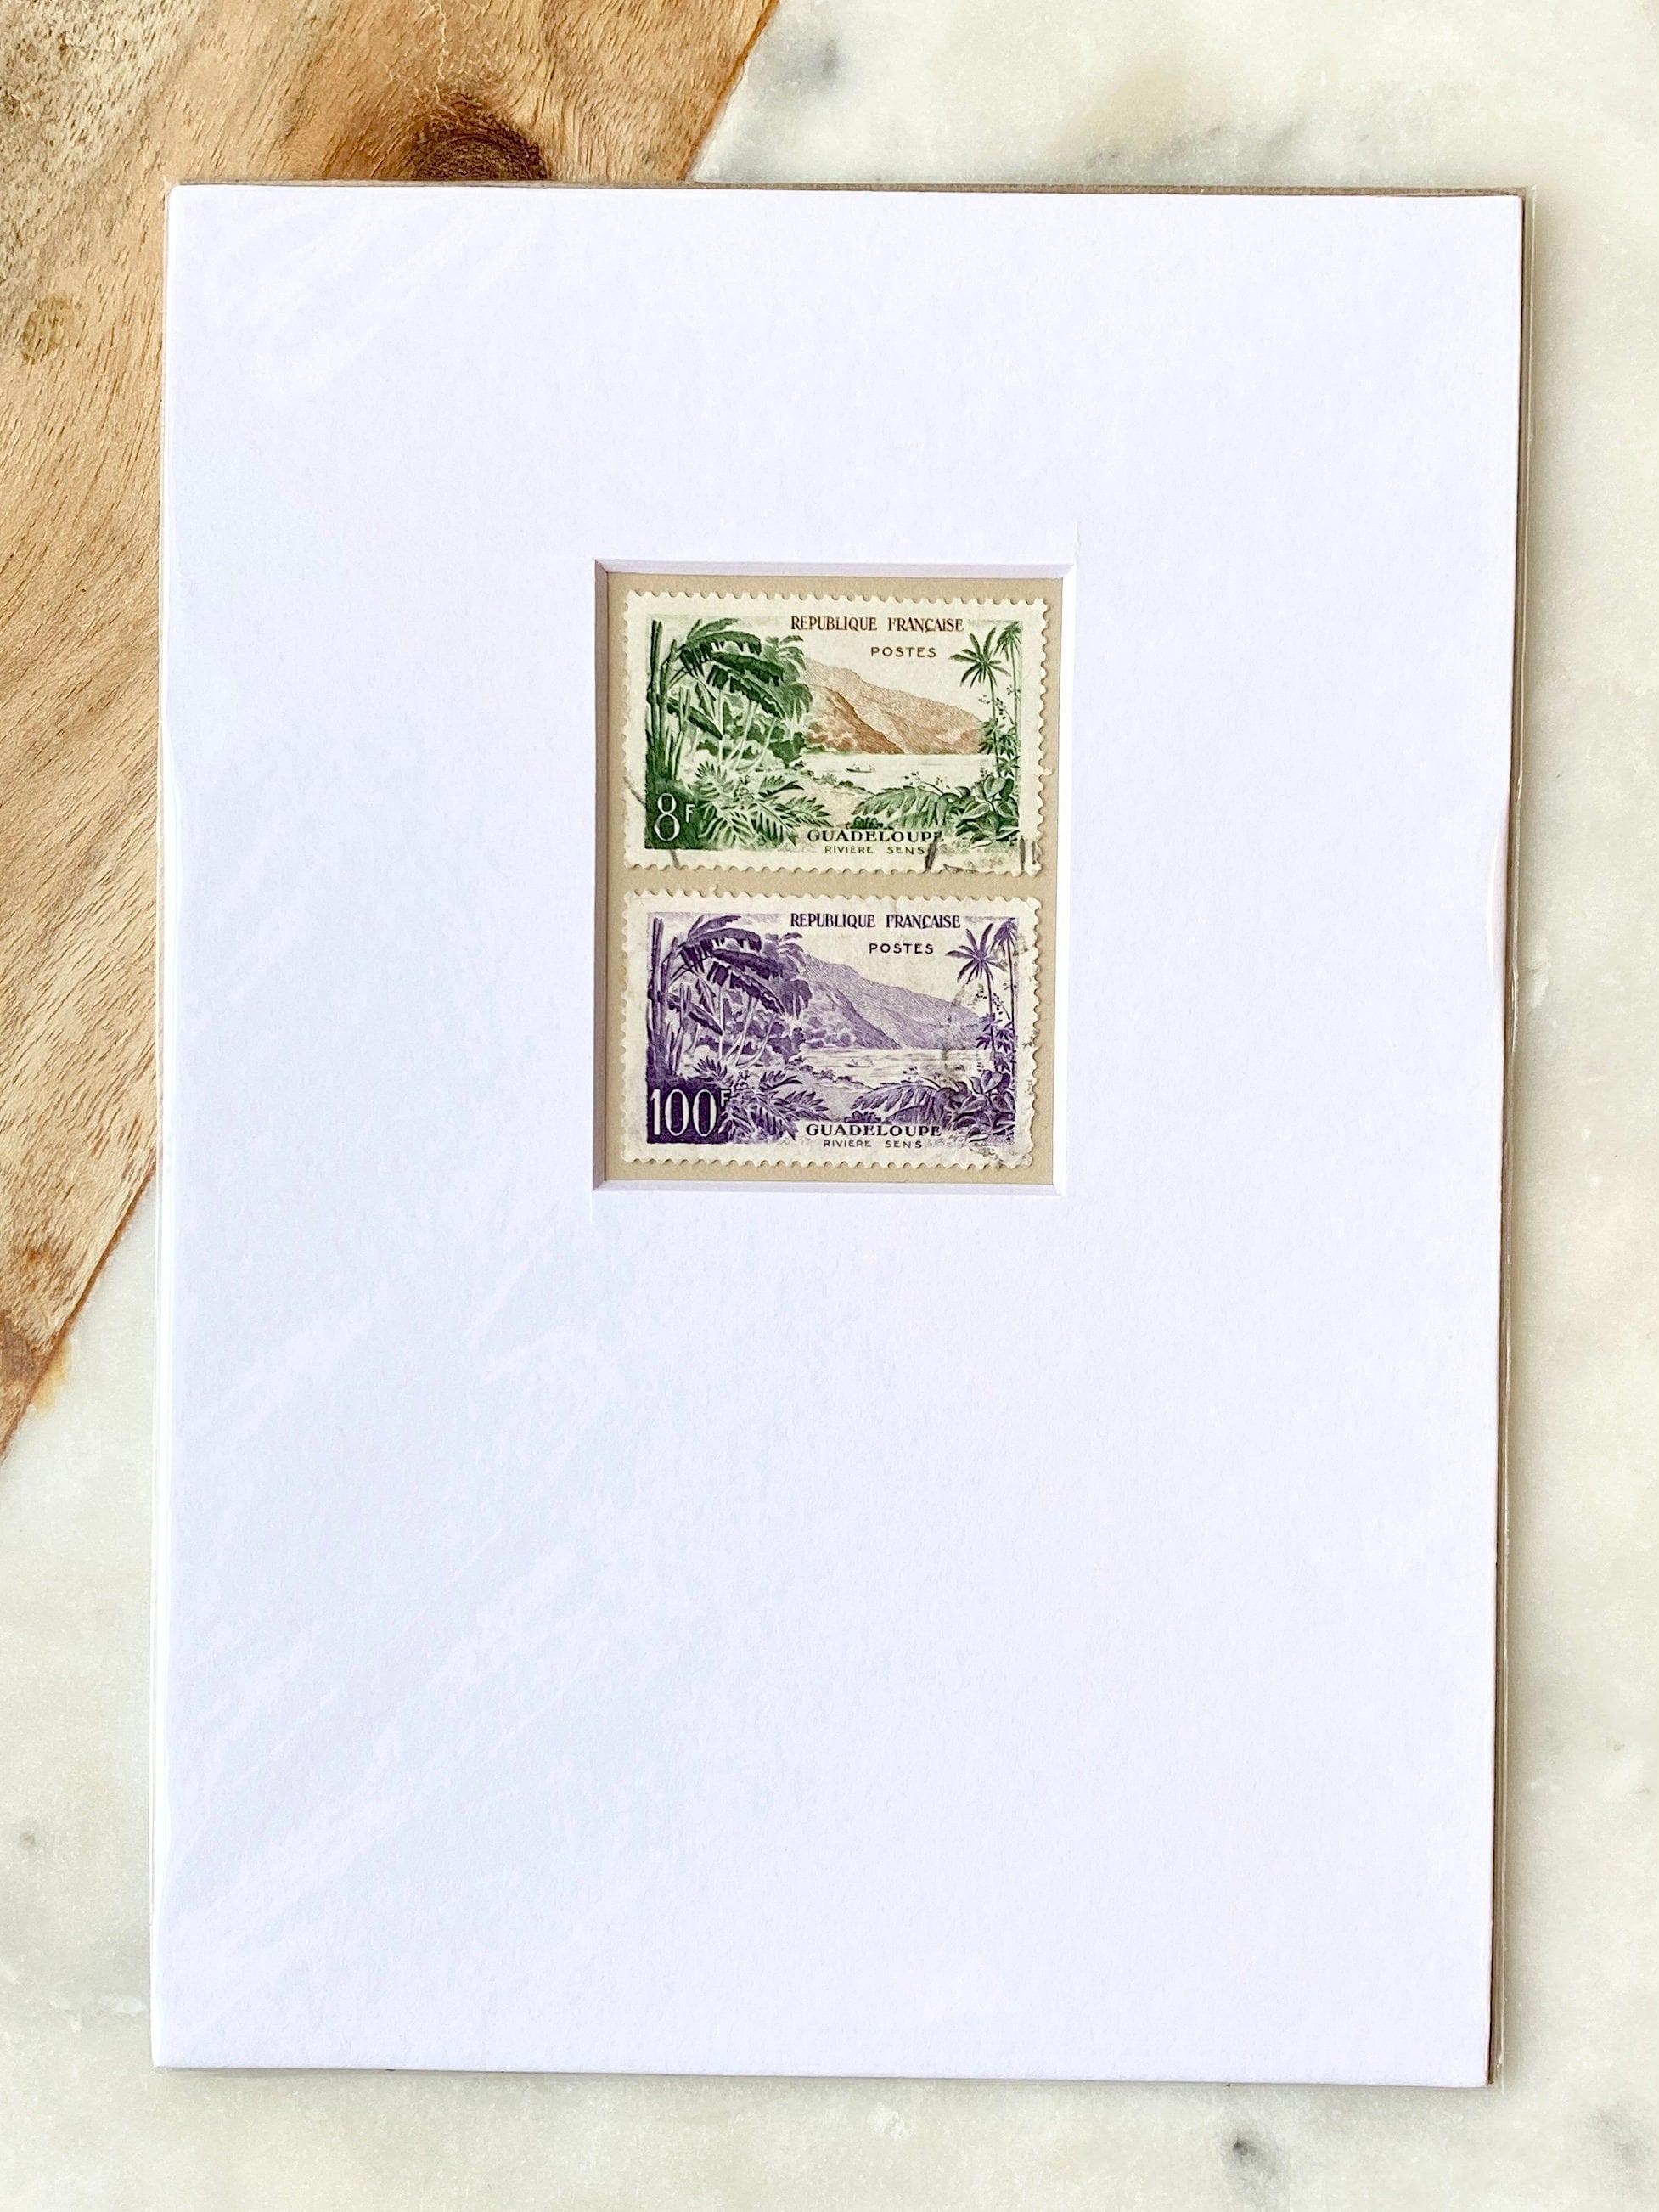 1931 France International Colonial Exhibition 2 50c, 1 40c 3 Stamps 